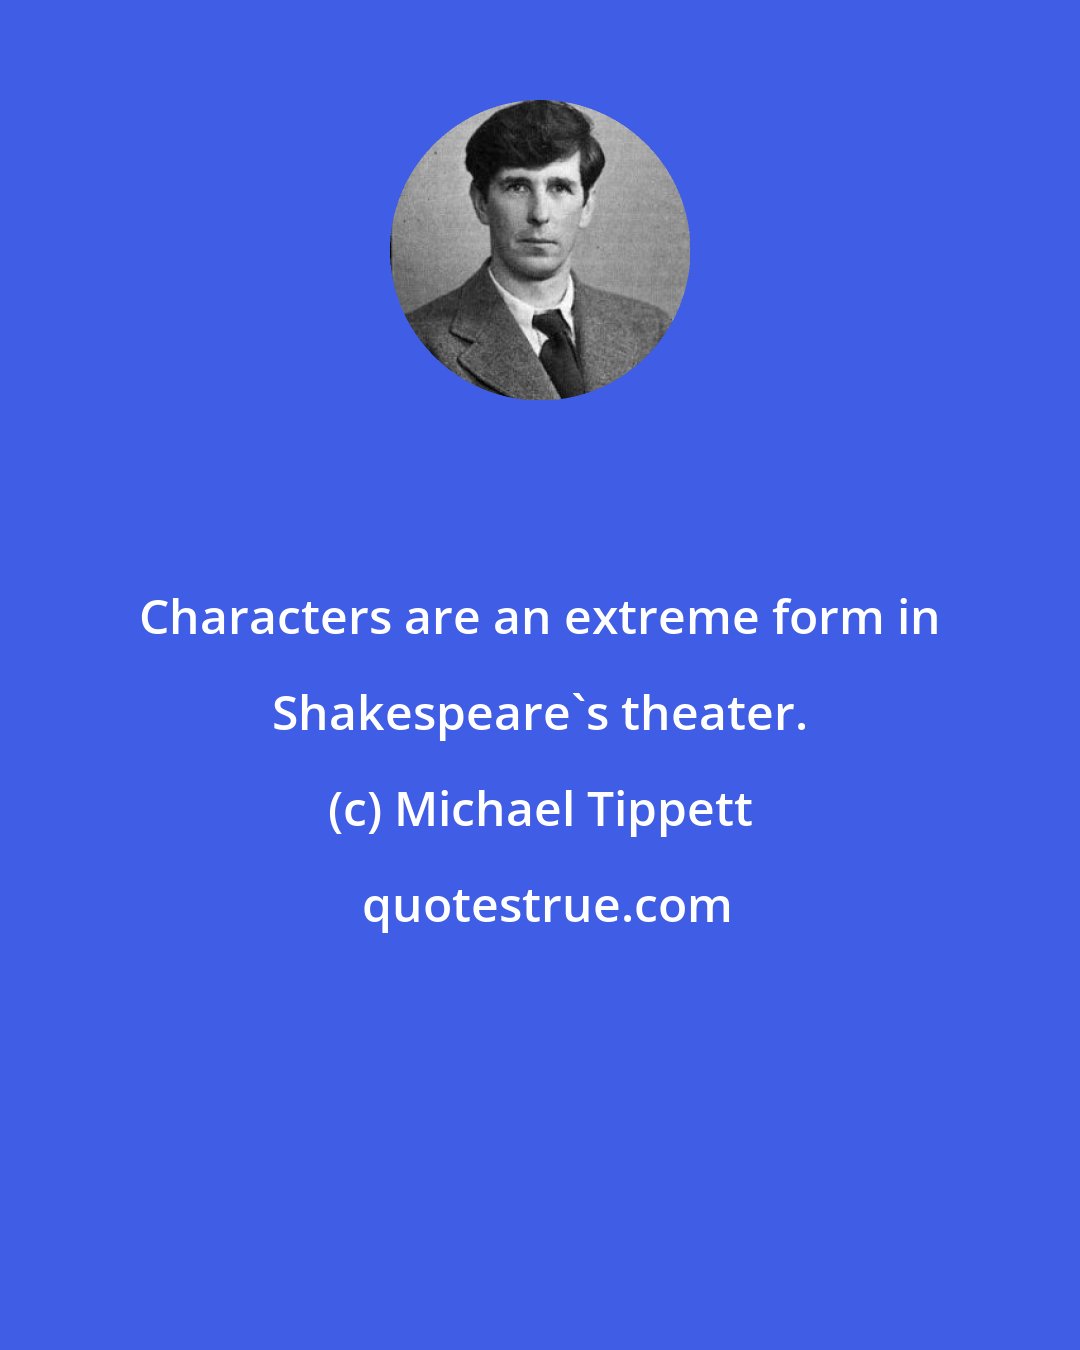 Michael Tippett: Characters are an extreme form in Shakespeare's theater.